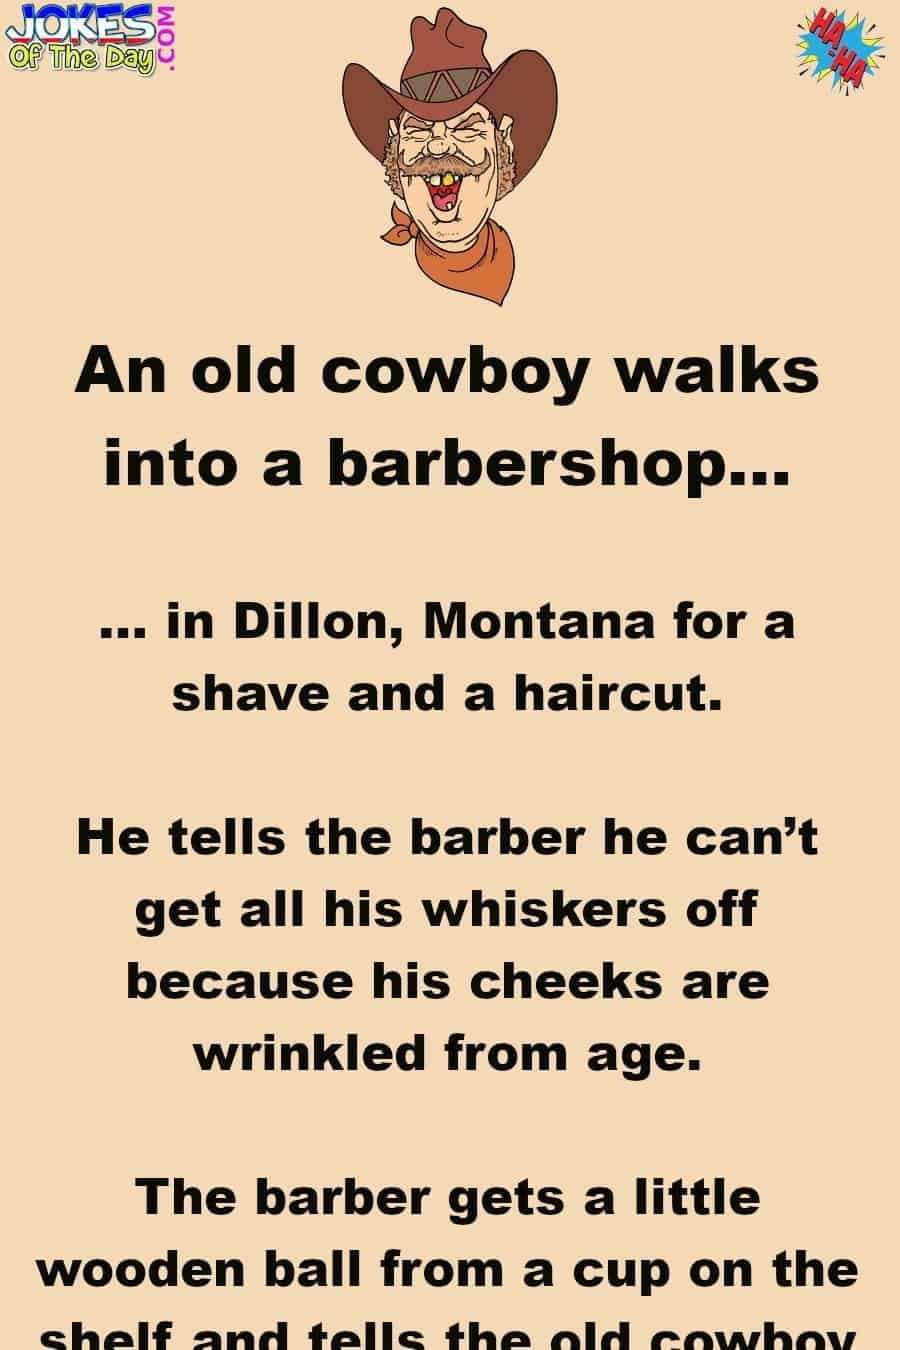 Funny Joke - The old cowboy never expected his barber to say this  ‣ Jokes Of The Day 